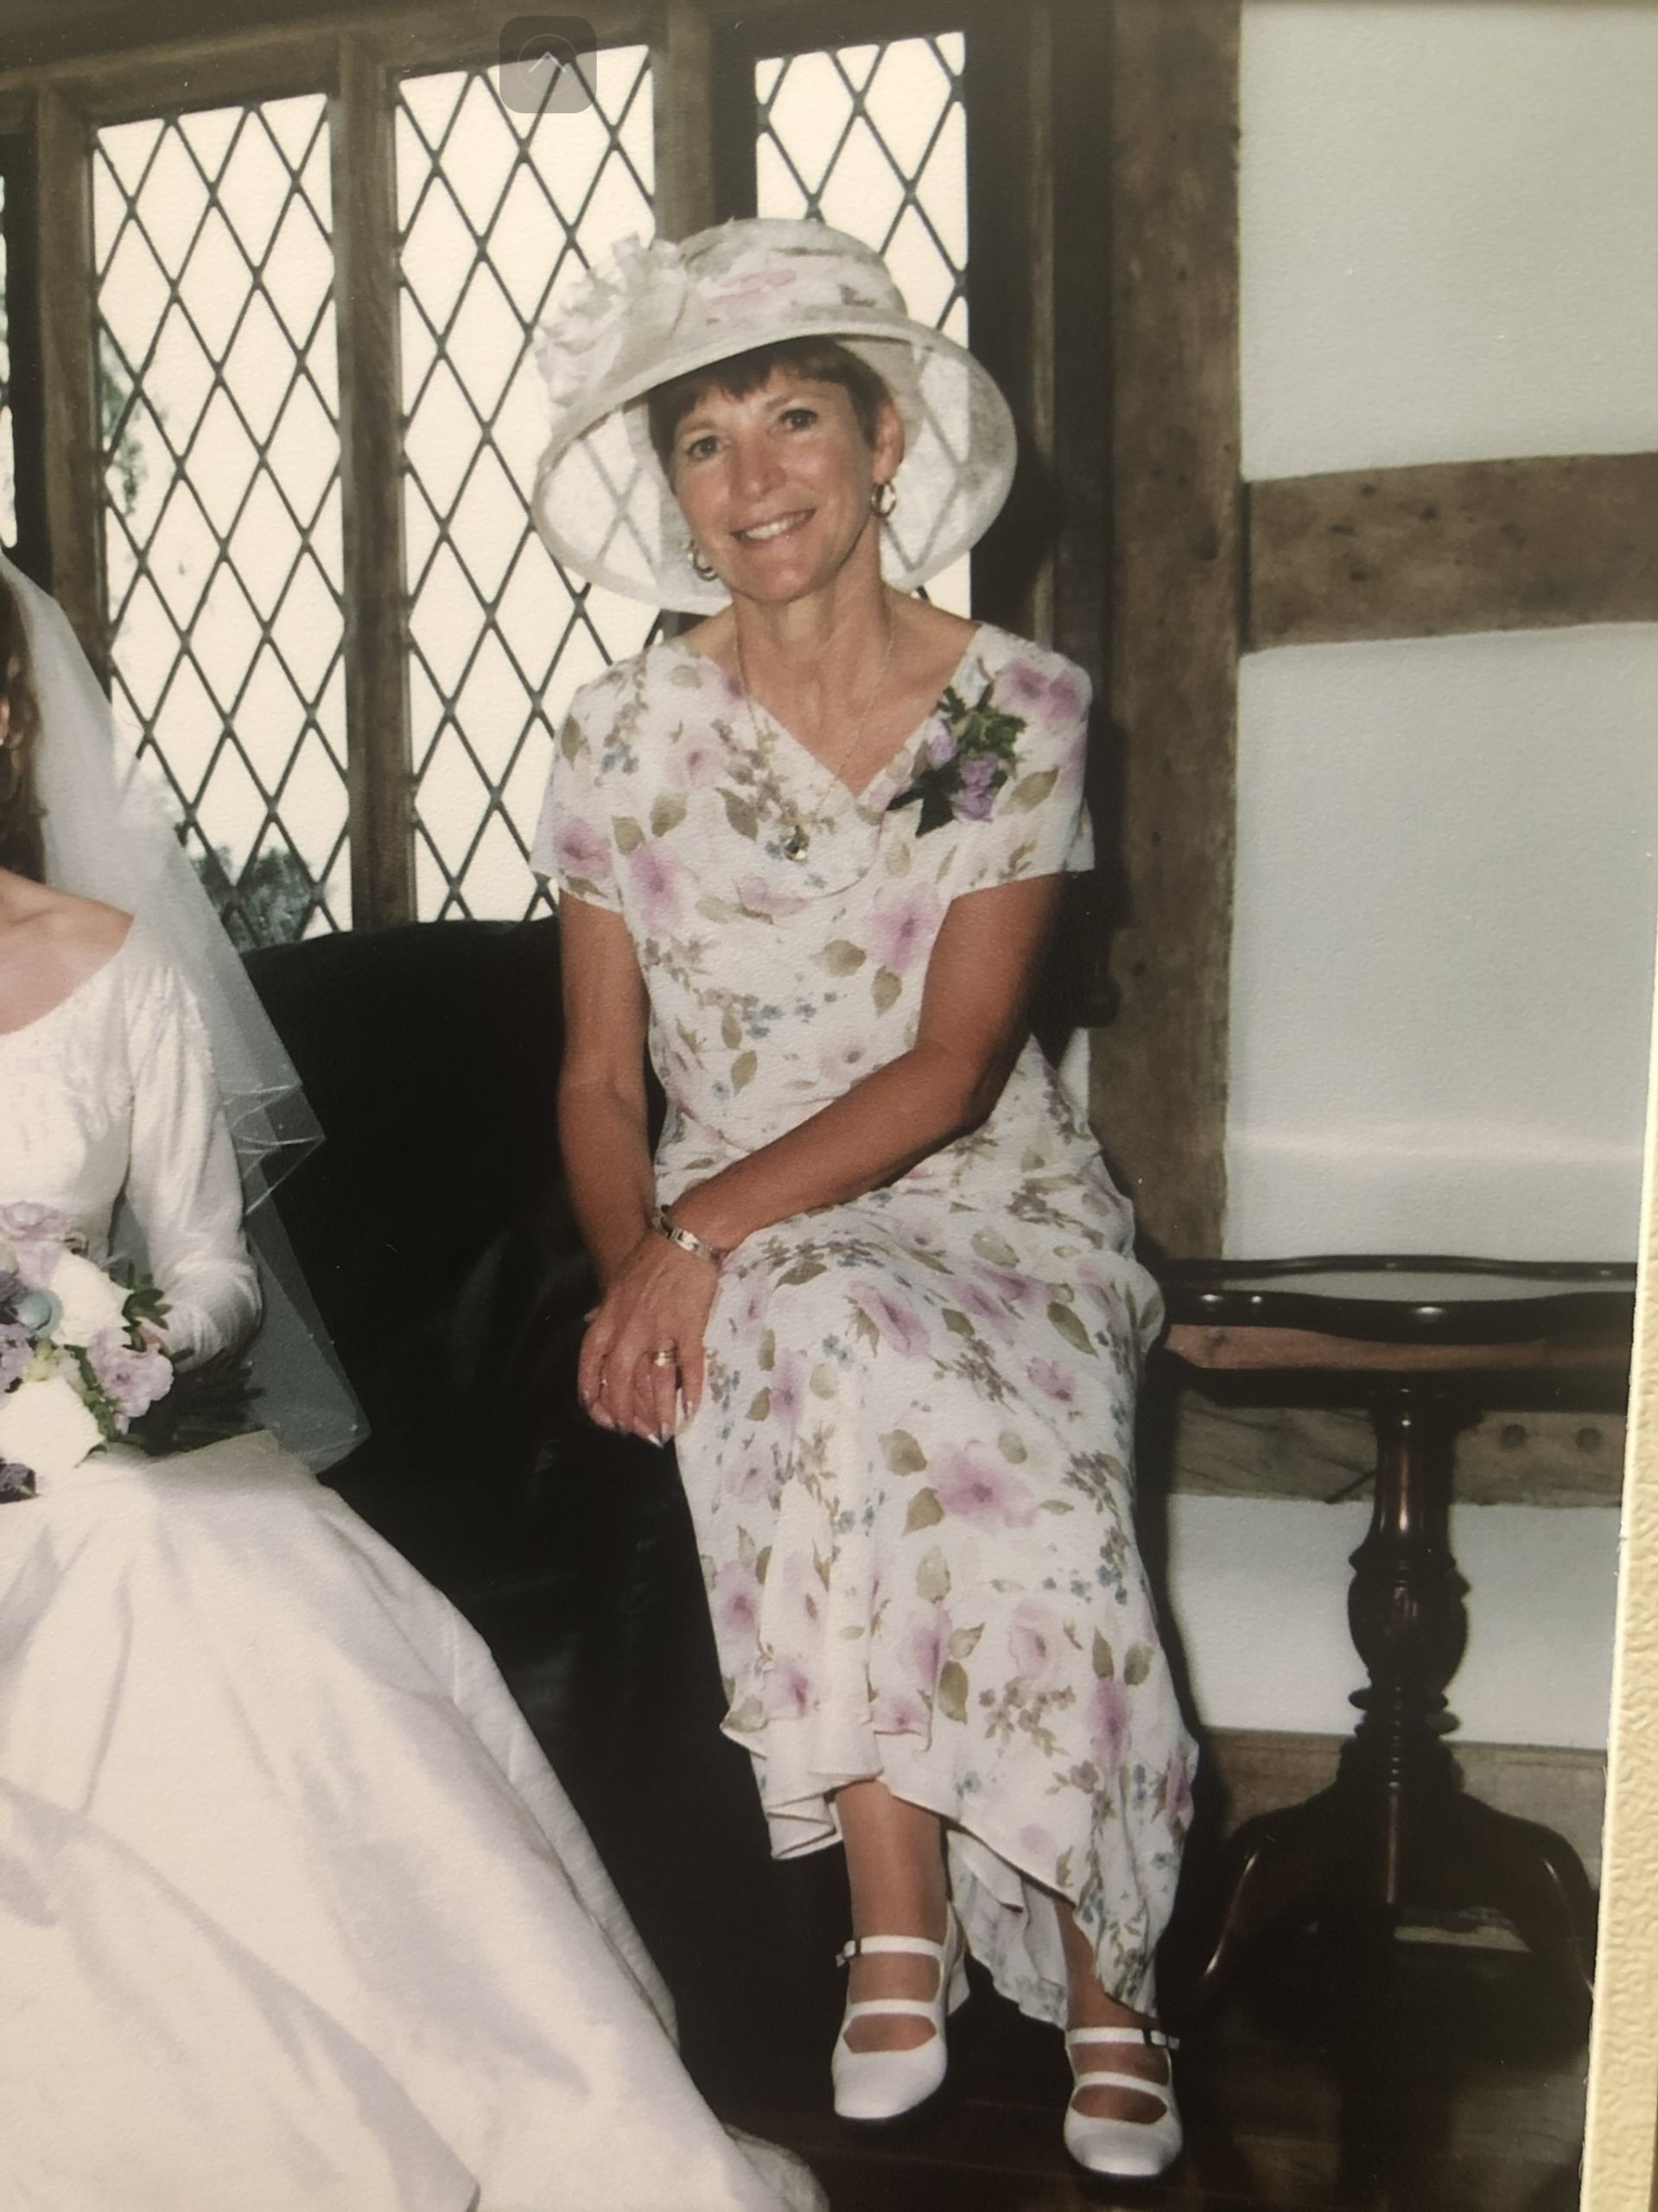 Mother in law at my wedding